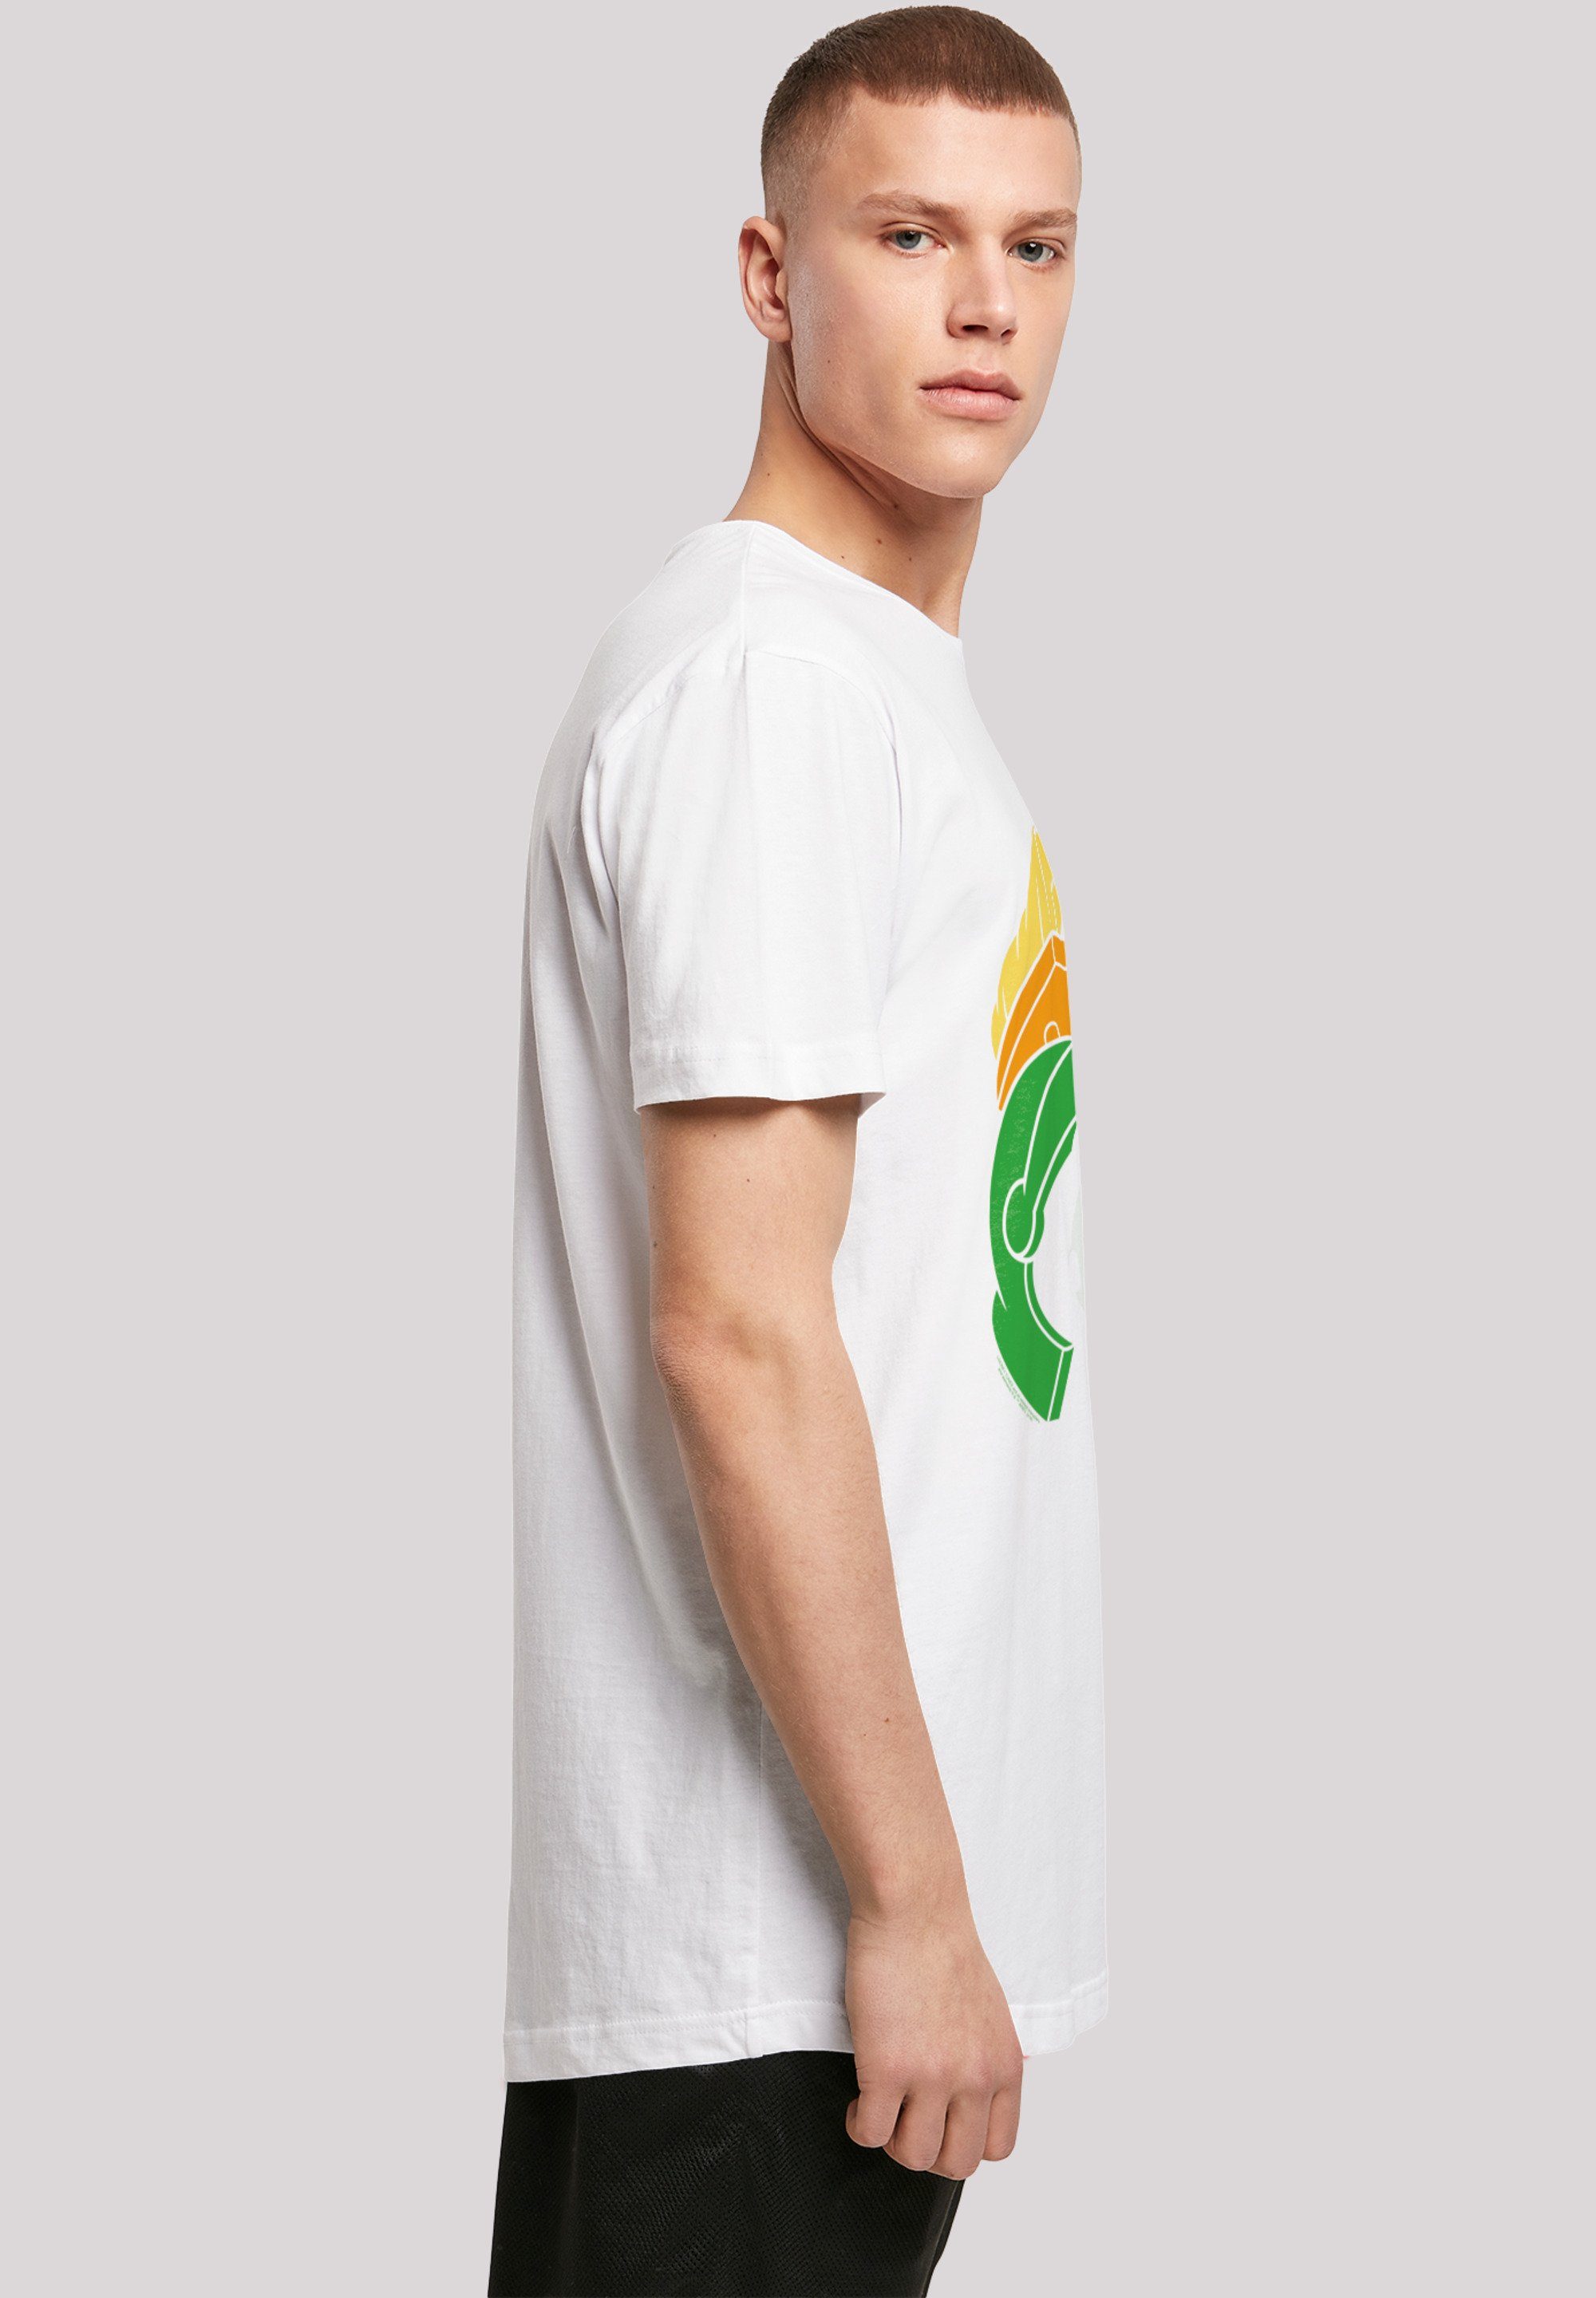 Marvin Shaped Long white Kurzarmshirt (1-tlg) Tee Martian with The Herren Face F4NT4STIC